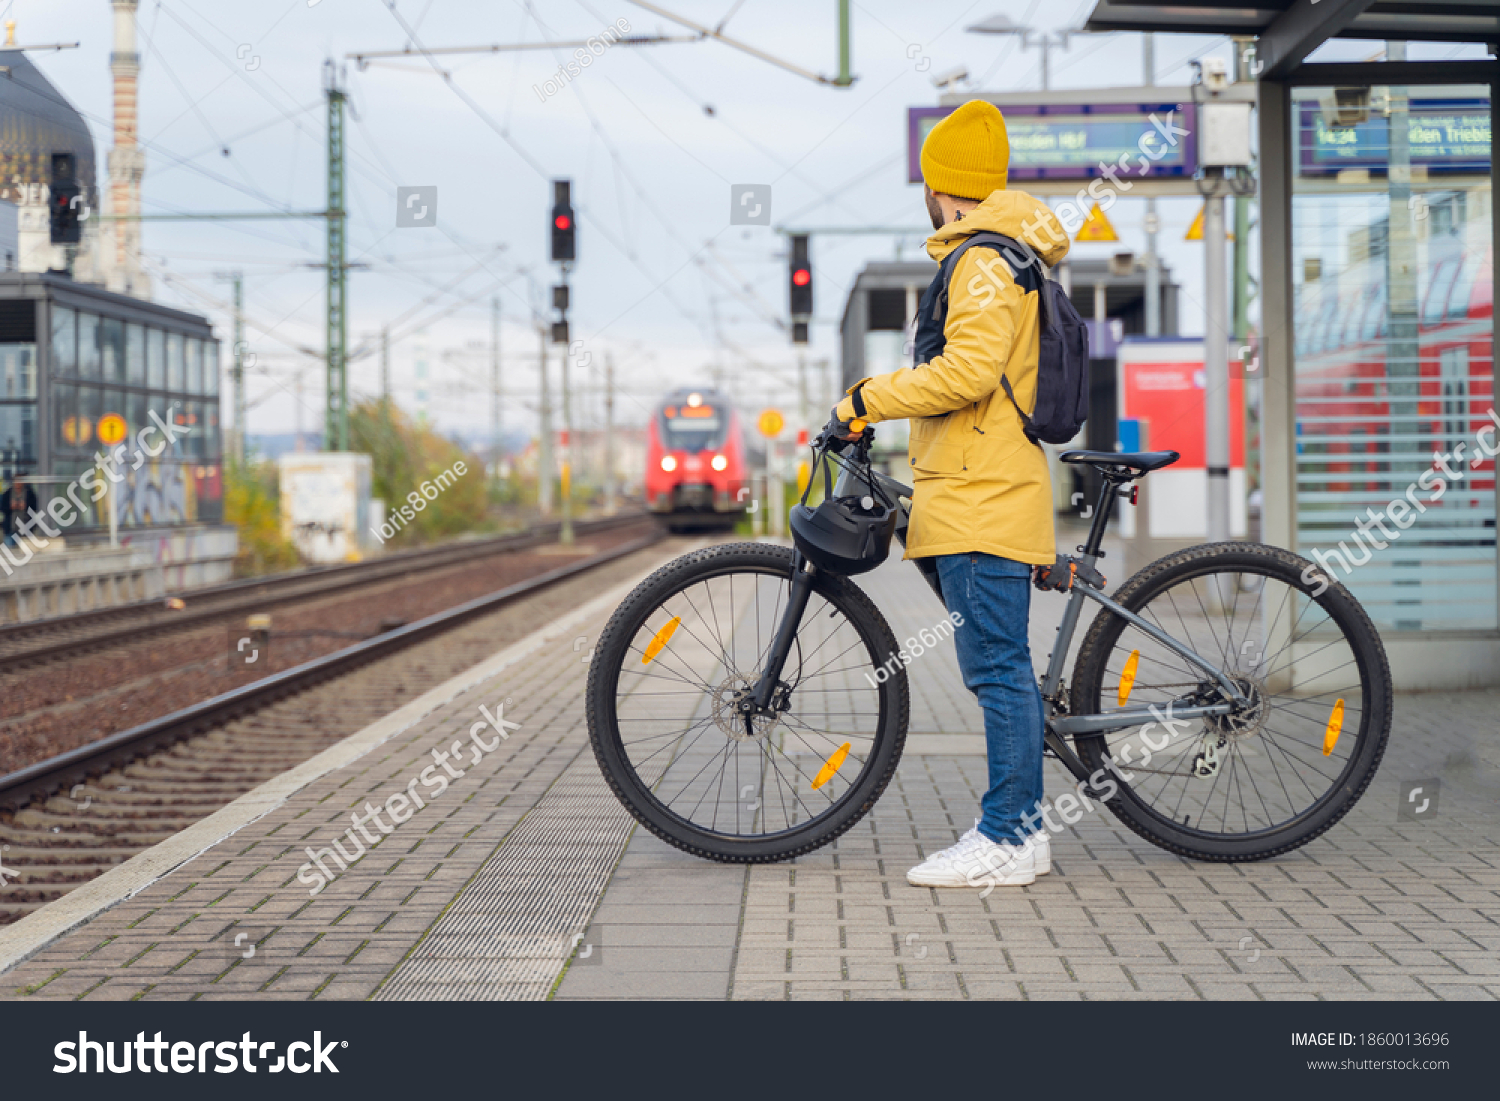 A man in winter clothes, waiting with his bike, the train. In the background the train that is about to arrive. #1860013696